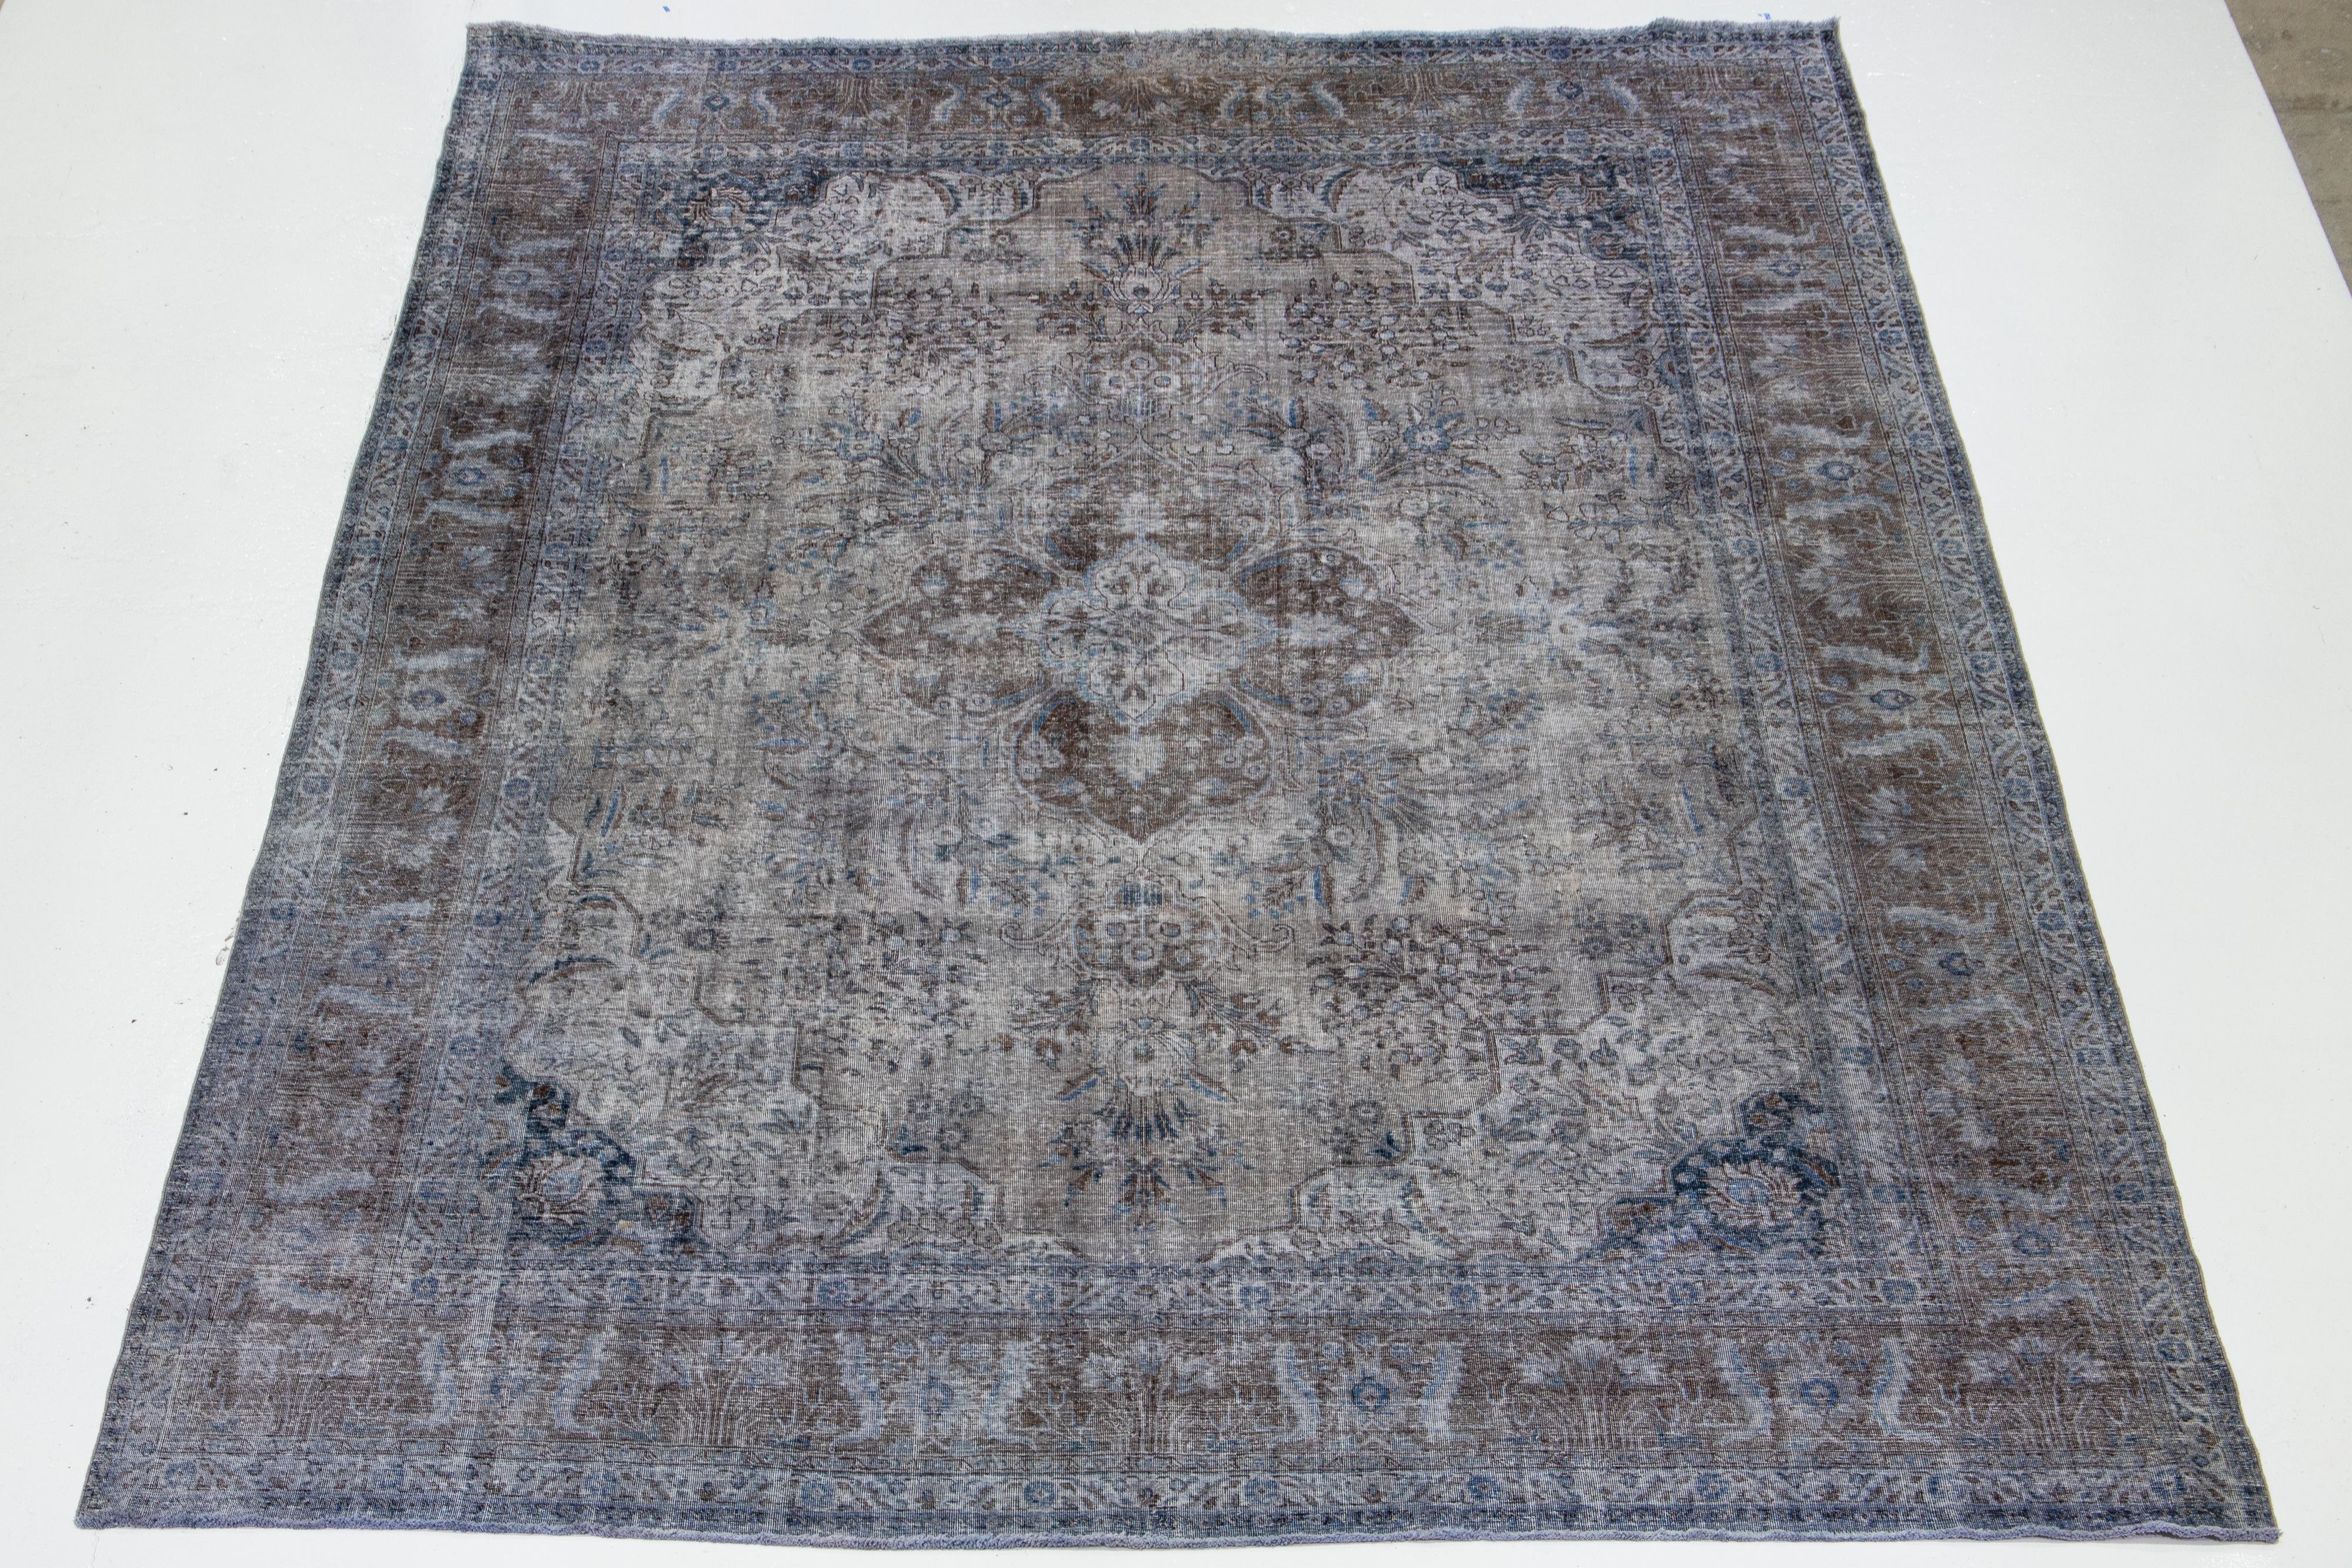 This is a gray antique hand-knotted Persian wool rug with an all-over floral design with brown and blue accents.

This rug measures 11'3'' x 14'11